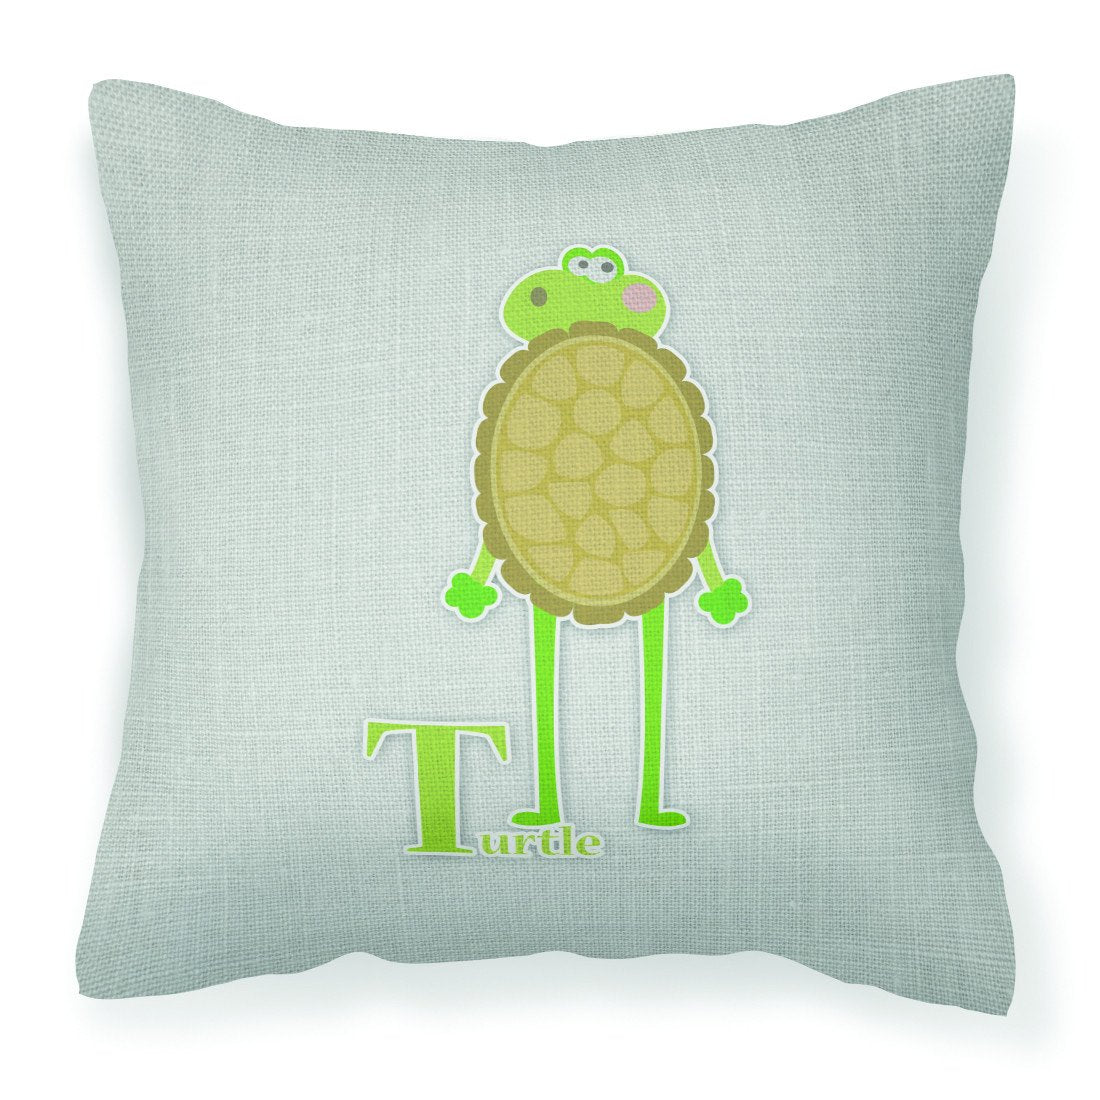 Alphabet T for Turtle Fabric Decorative Pillow BB5745PW1818 by Caroline's Treasures